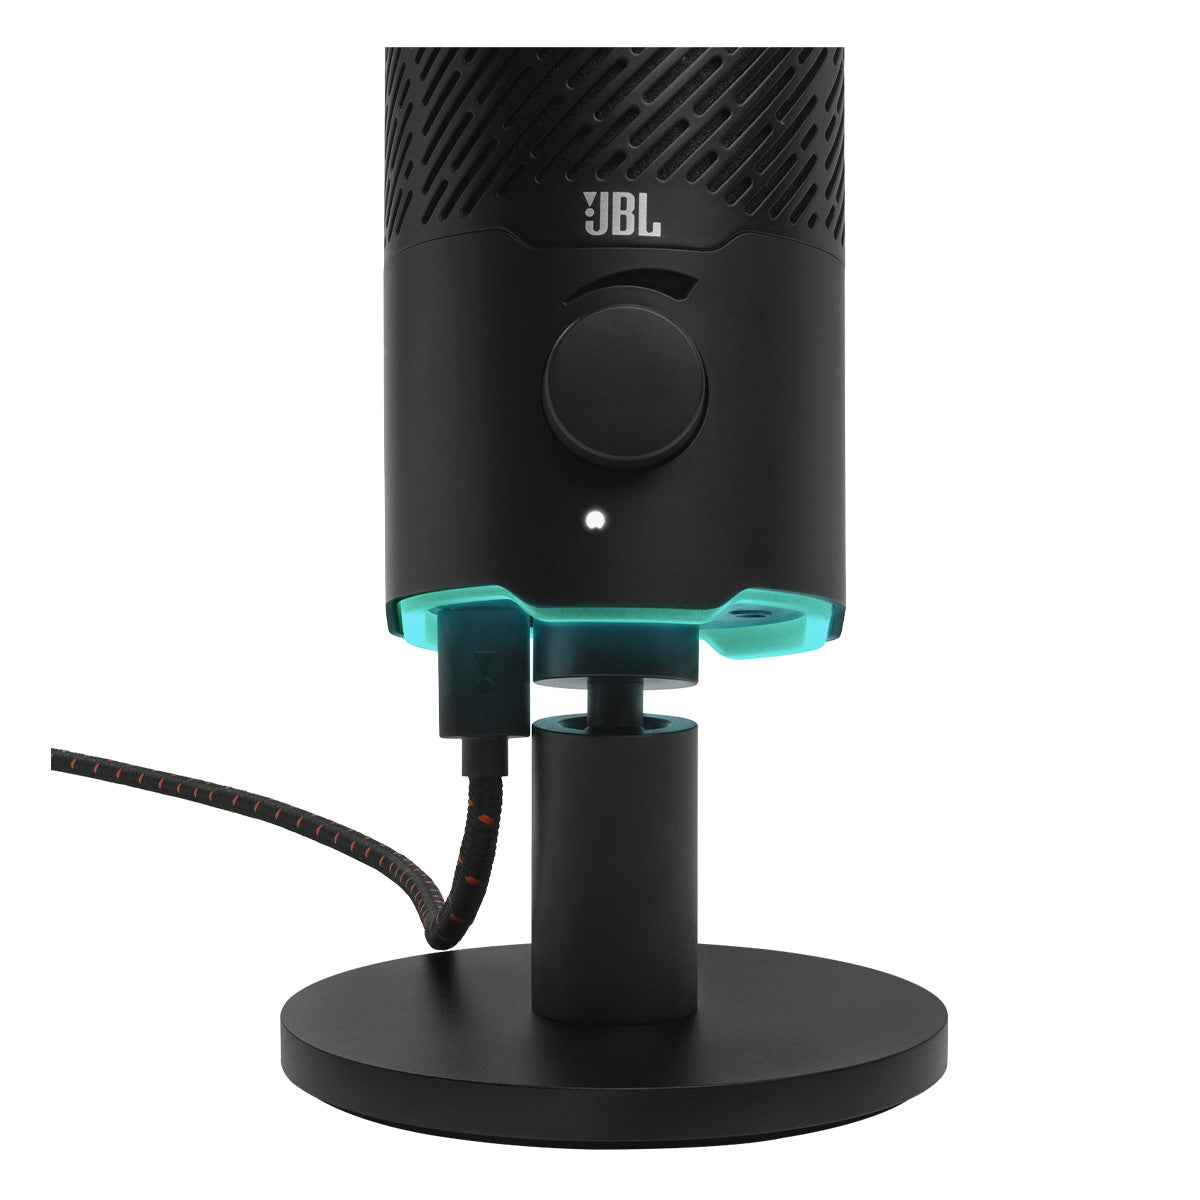 The JBL Quantum Stream Studio is the perfect mic for pro users